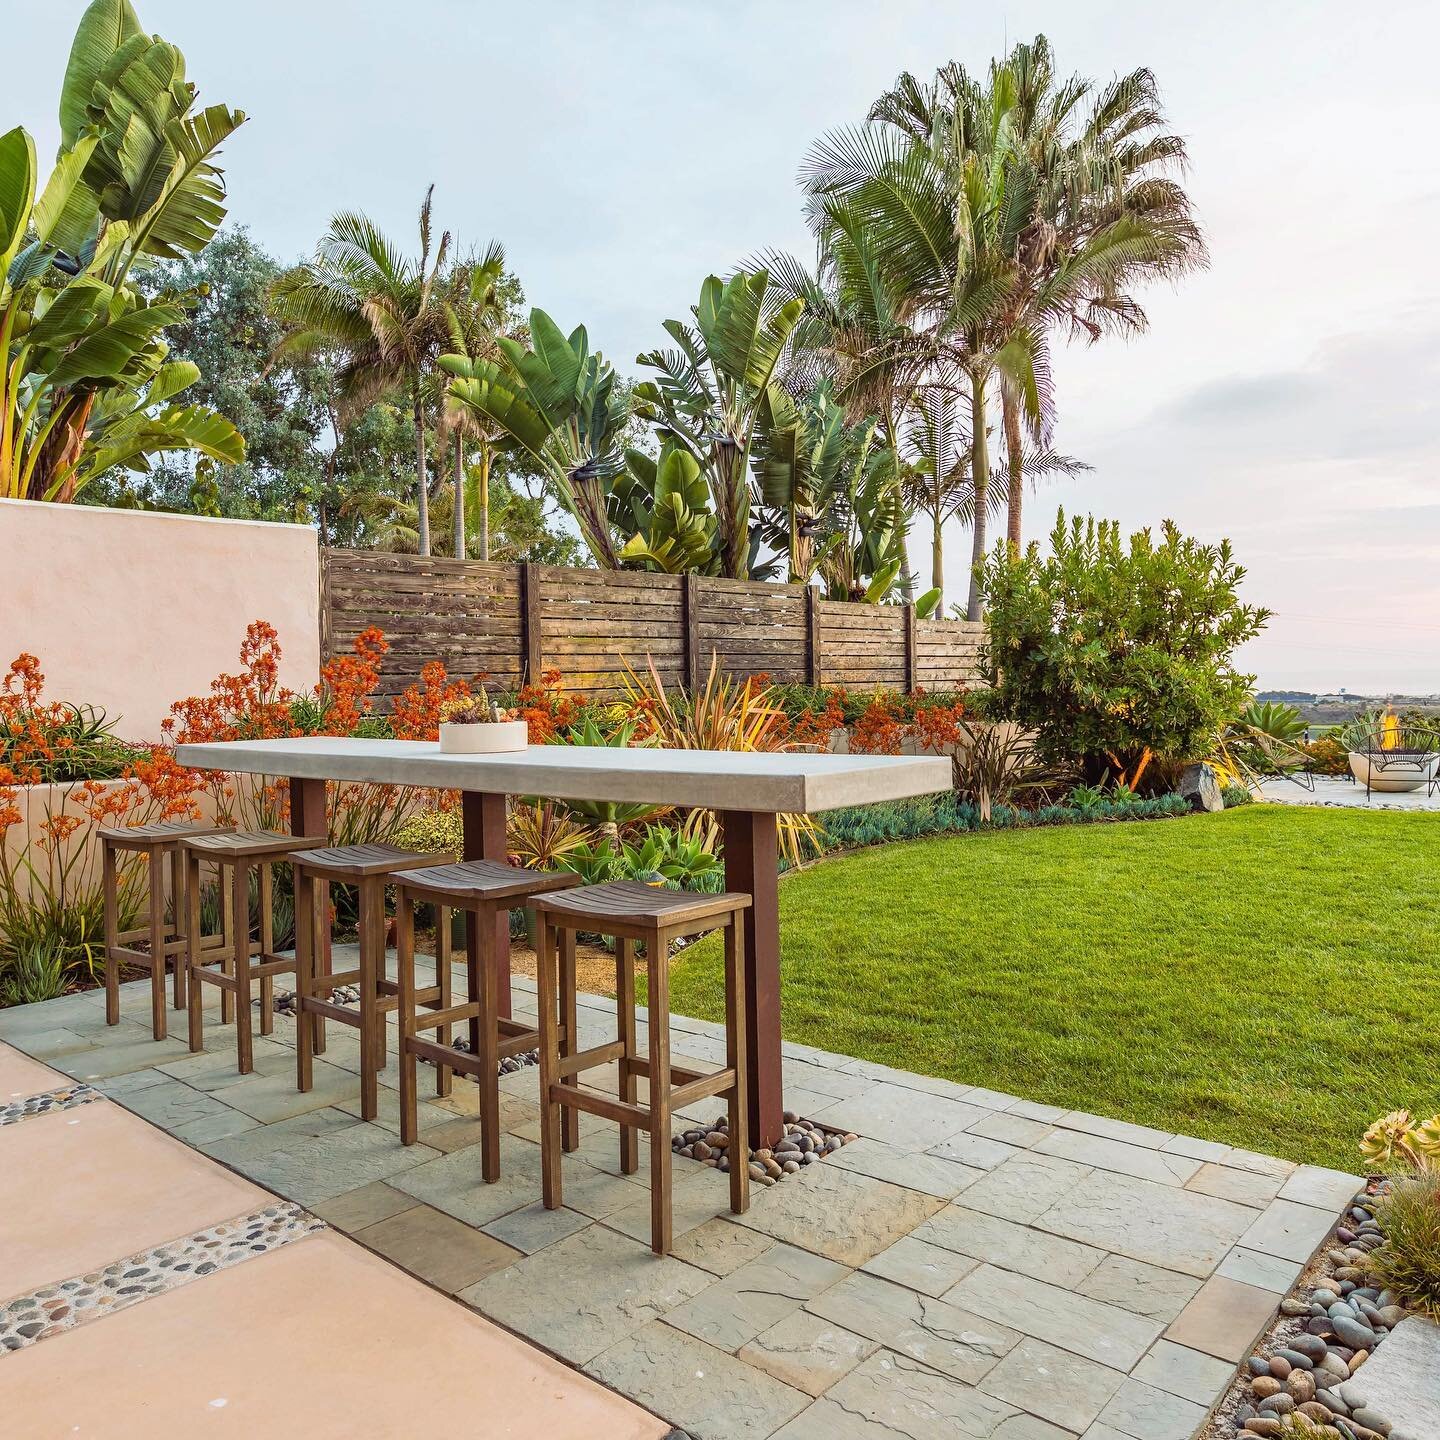 These are the best seats in the house. This yard sits above the Batiquitos lagoon  in Leucadia and looks out over Ponto beach. We cut into this existing slate patio and placed Corten steel posts to support an open floating bar top to sip cocktails as